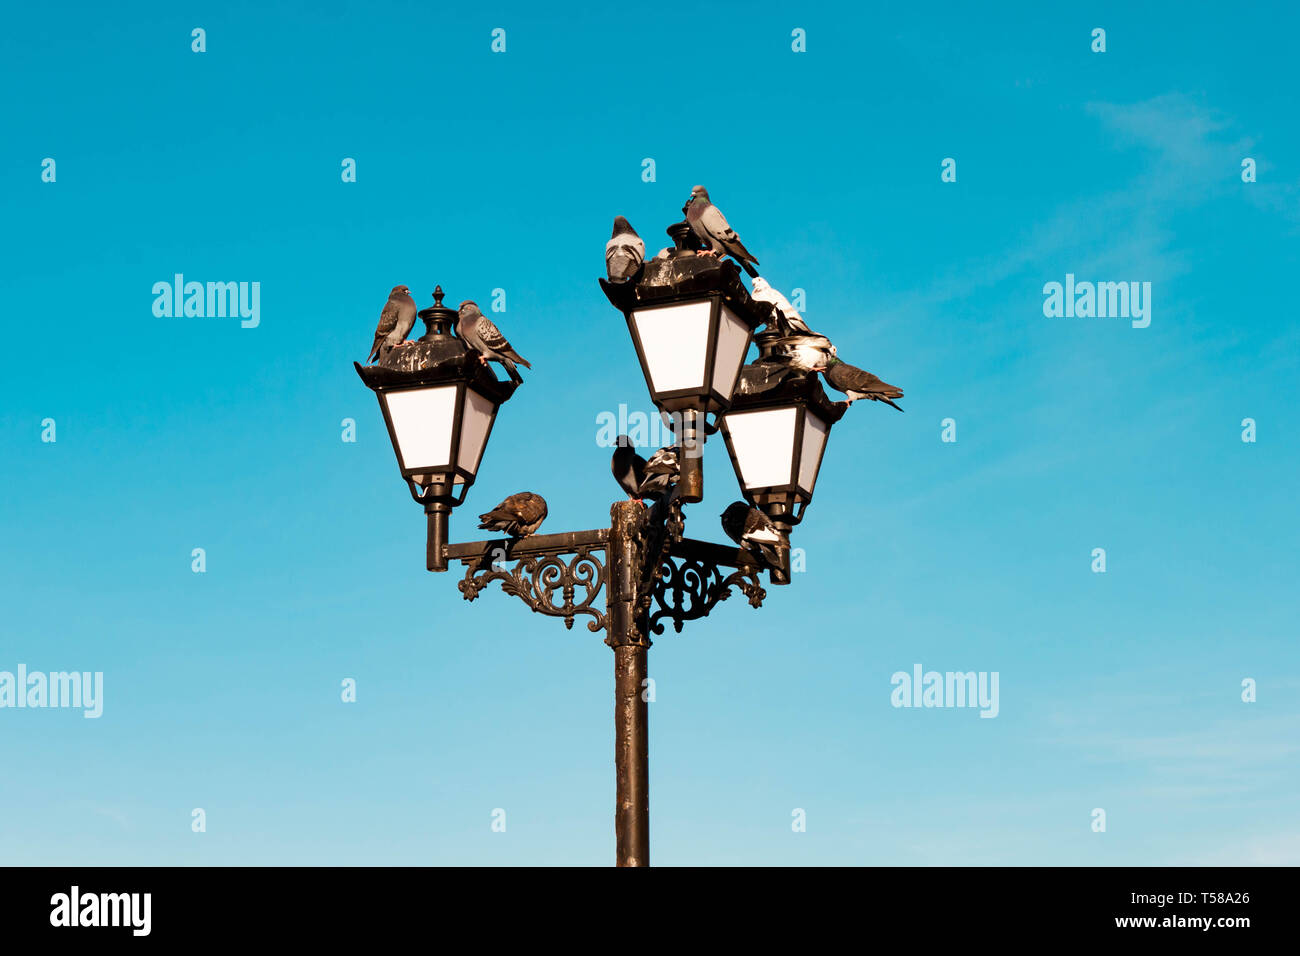 Beautiful vintage old retro electric street lamp with taking off and landing, sitting, resting pigeons on bright and sunny blue sky background Stock Photo